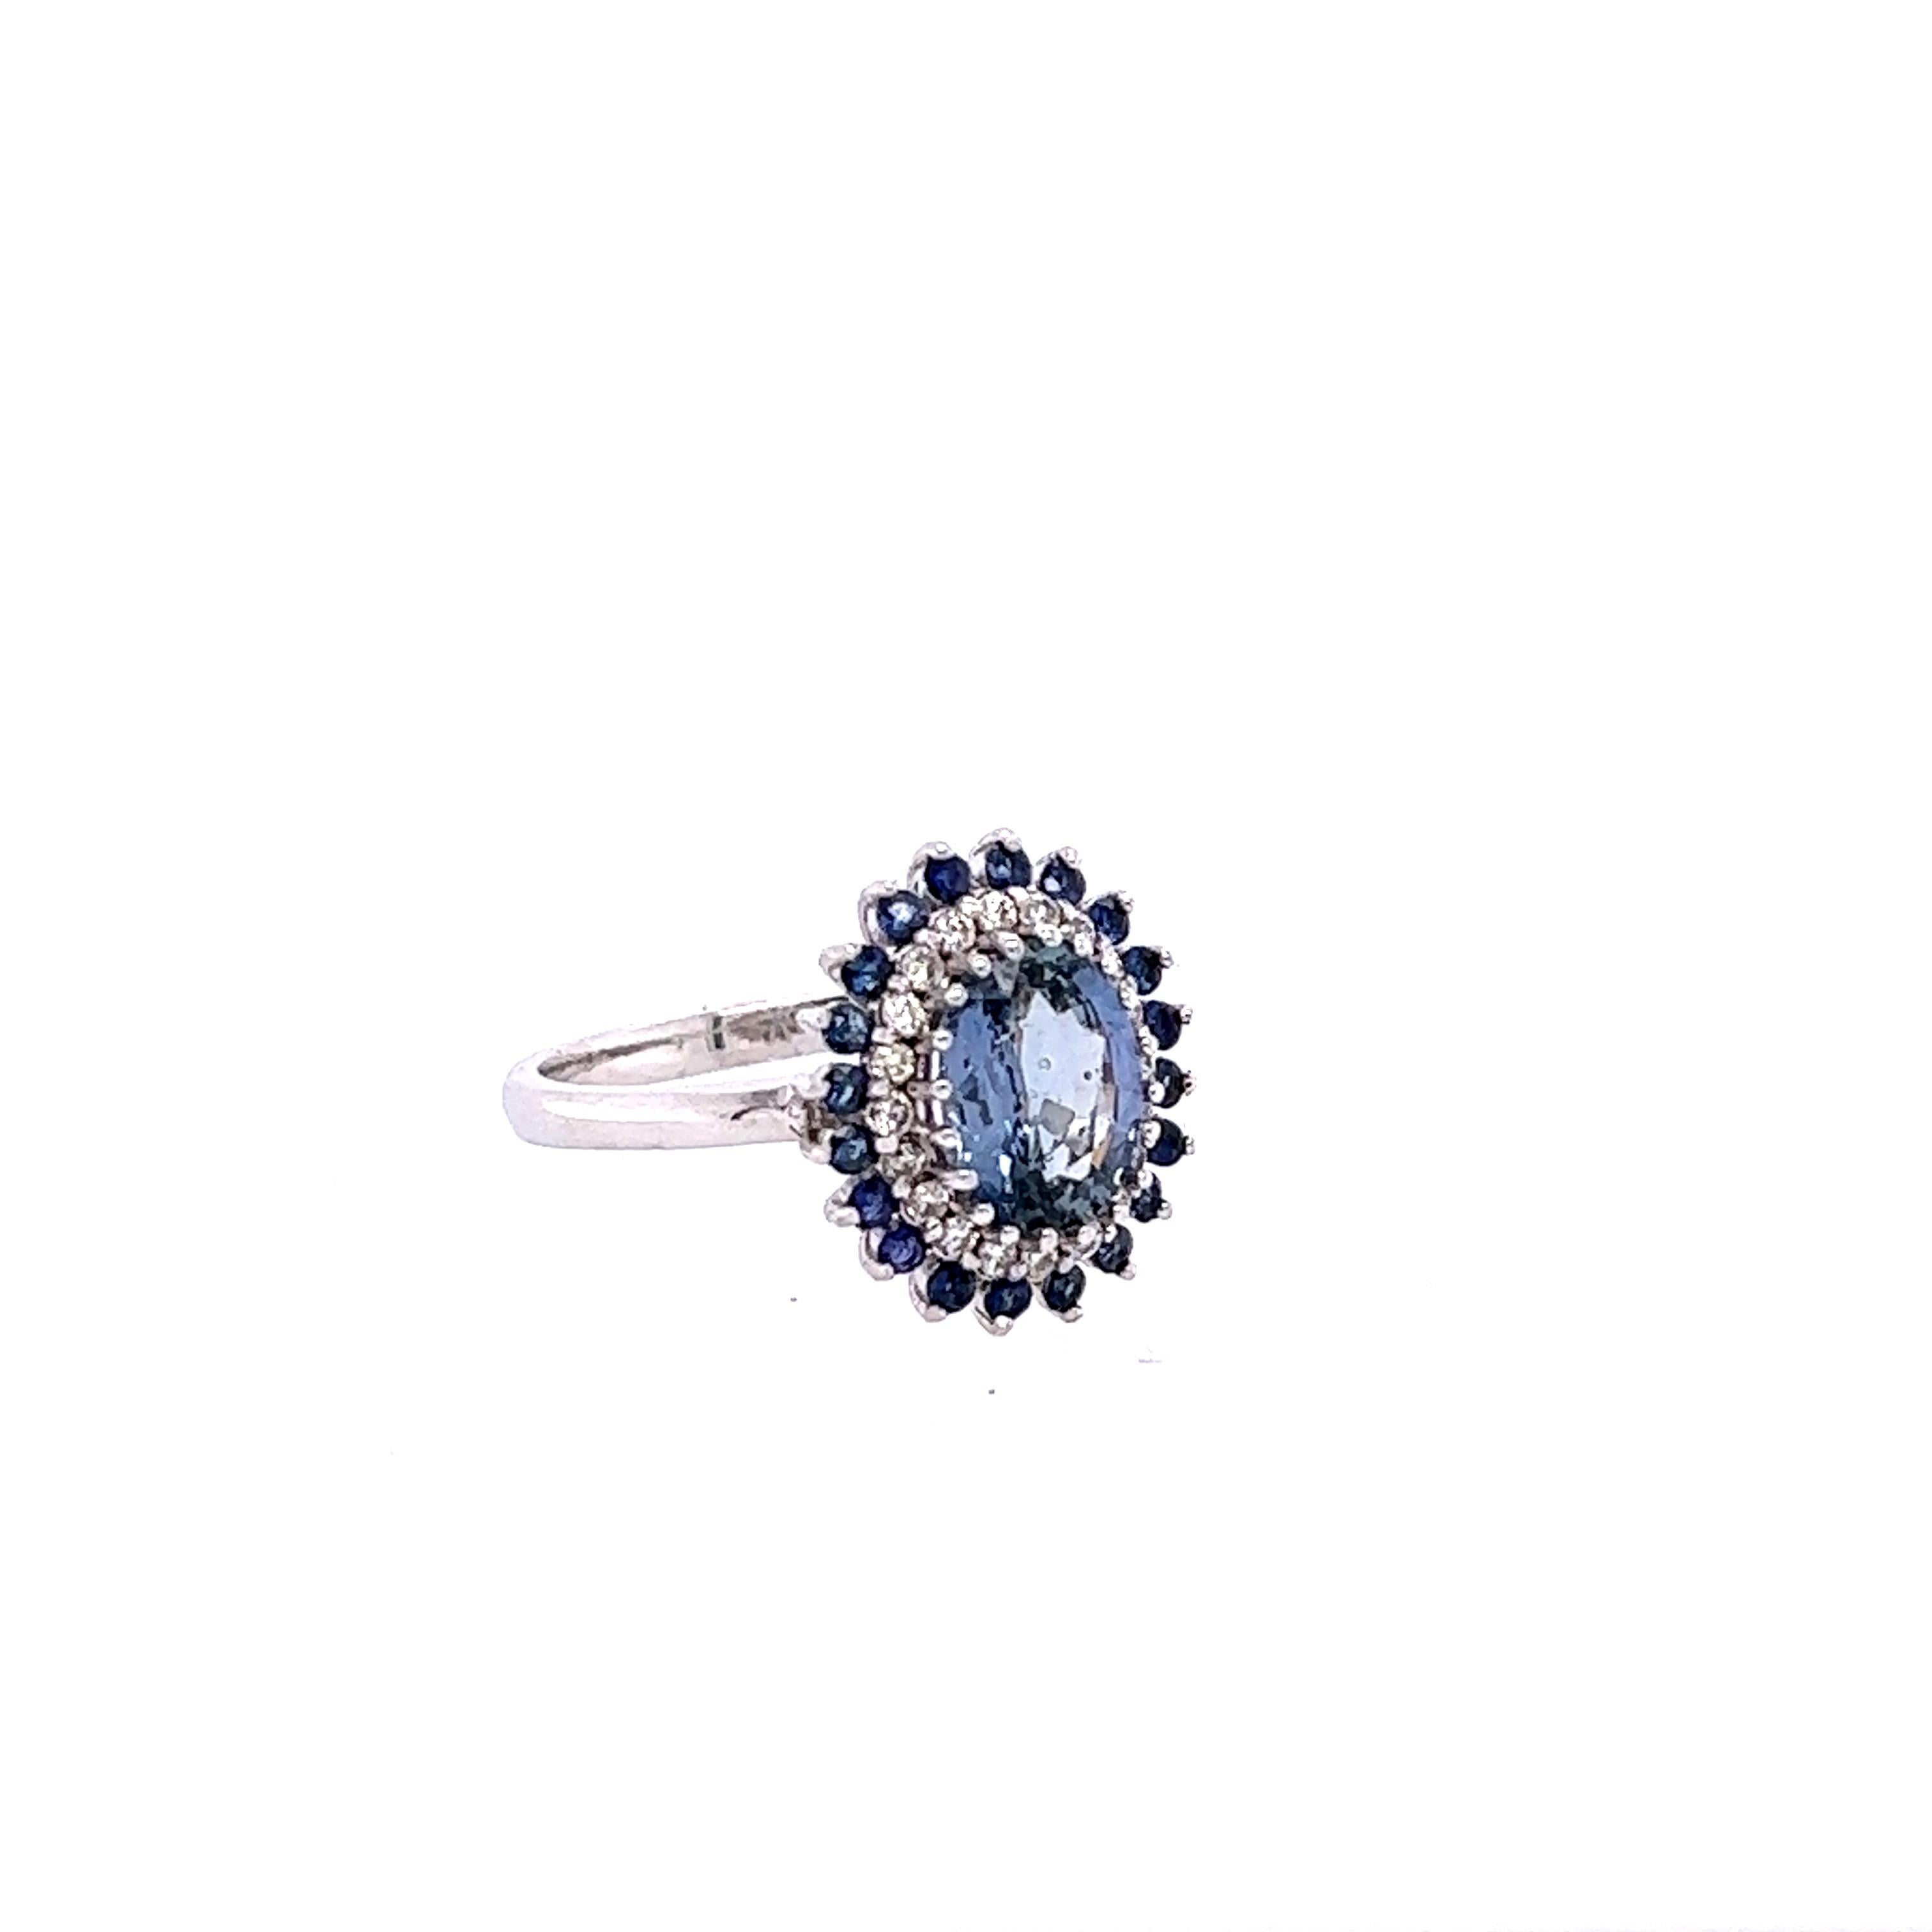 This ring has a Natural Oval Cut GIA Certified Blue Sapphire that weighs 1.75 carats. 
The GIA Certificate # is: 2223314194. The Blue Sapphire is natural and has no indications of heating. It is surrounded by 20 Blue Natural Round Cut Sapphires that